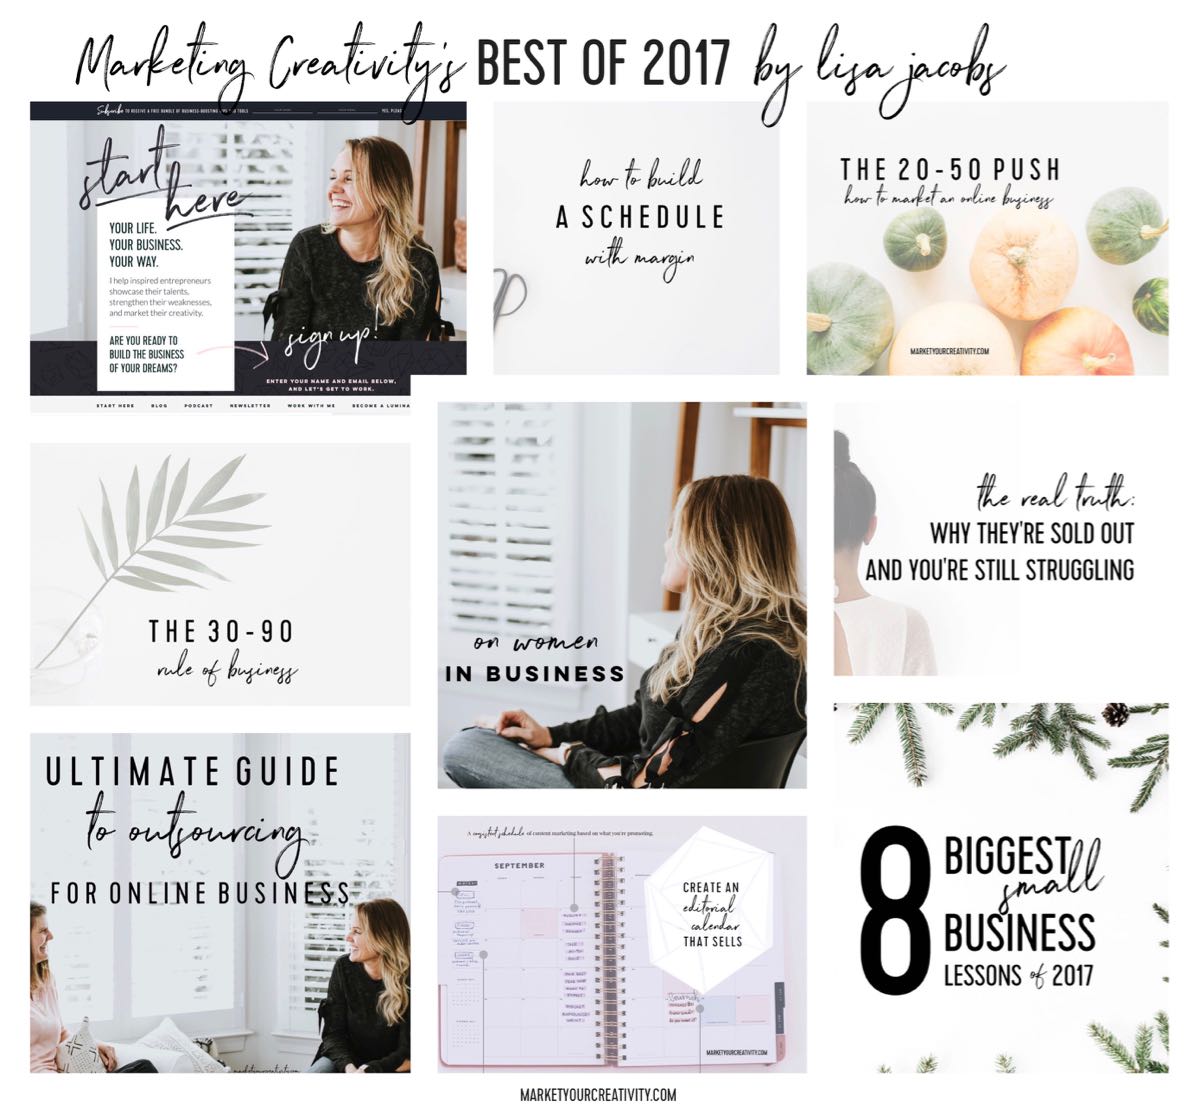 Marketing Creativity's best of 2017 by Lisa Jacobs